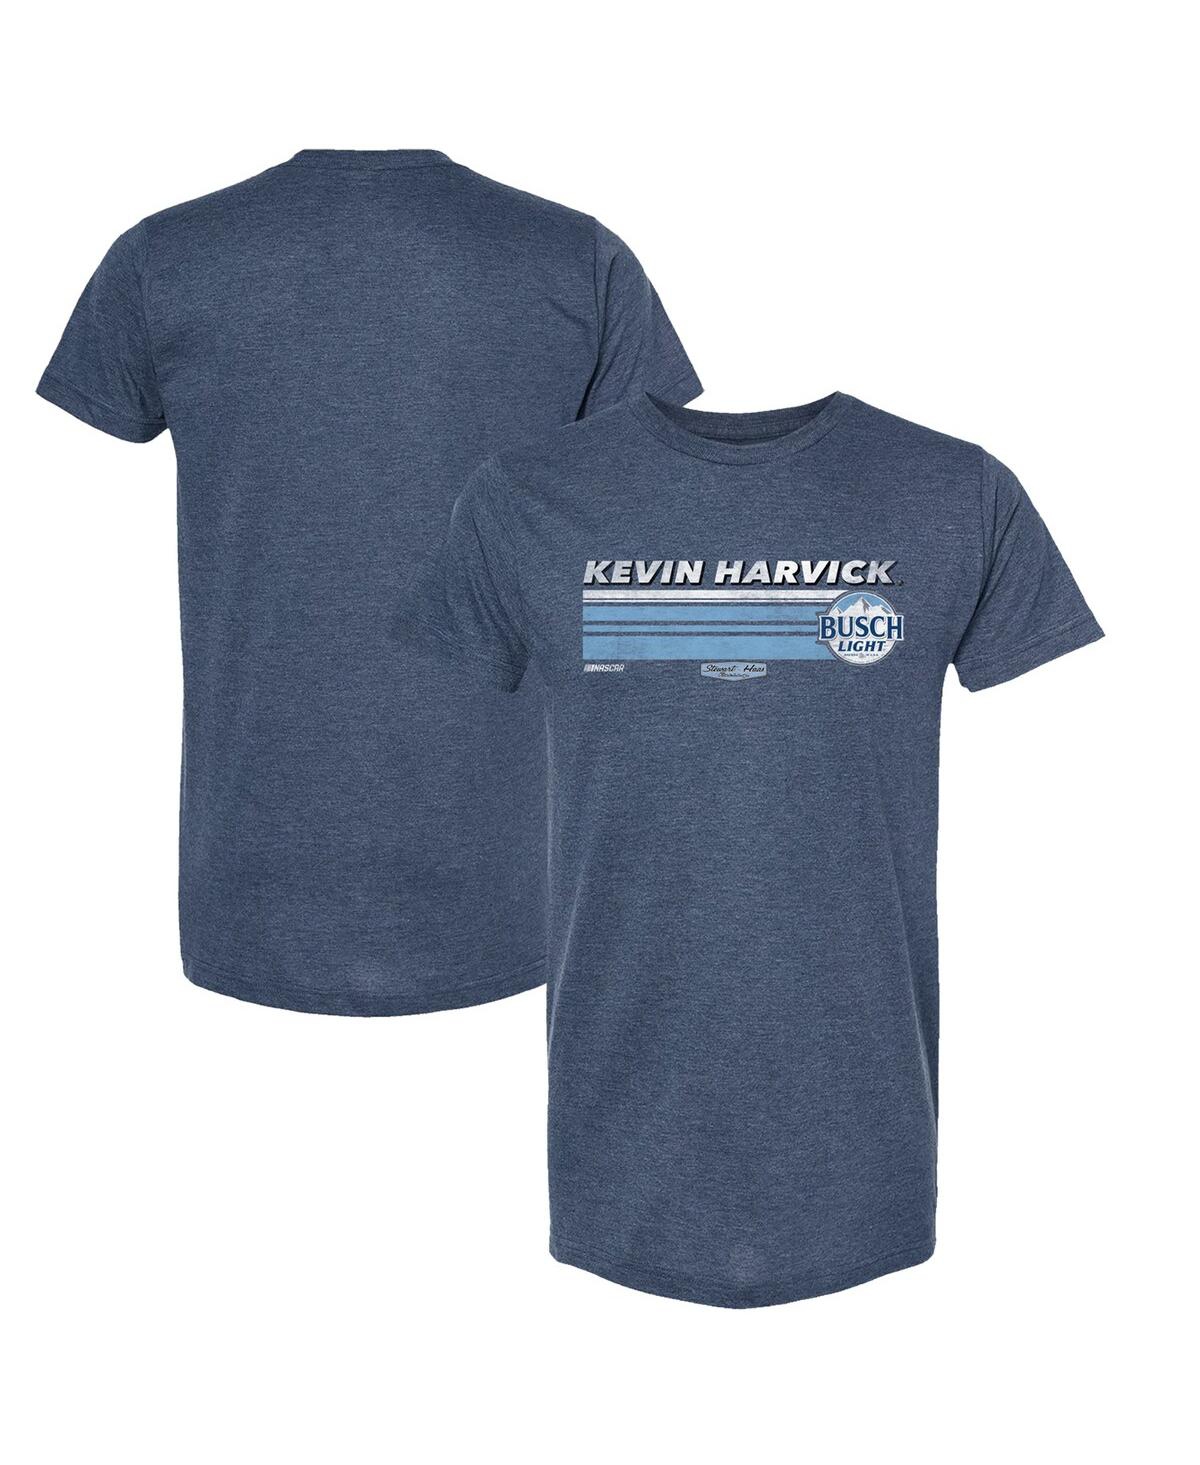 Stewart-haas Racing Team Collection Men's  Heather Navy Kevin Harvick Hot Lap T-shirt